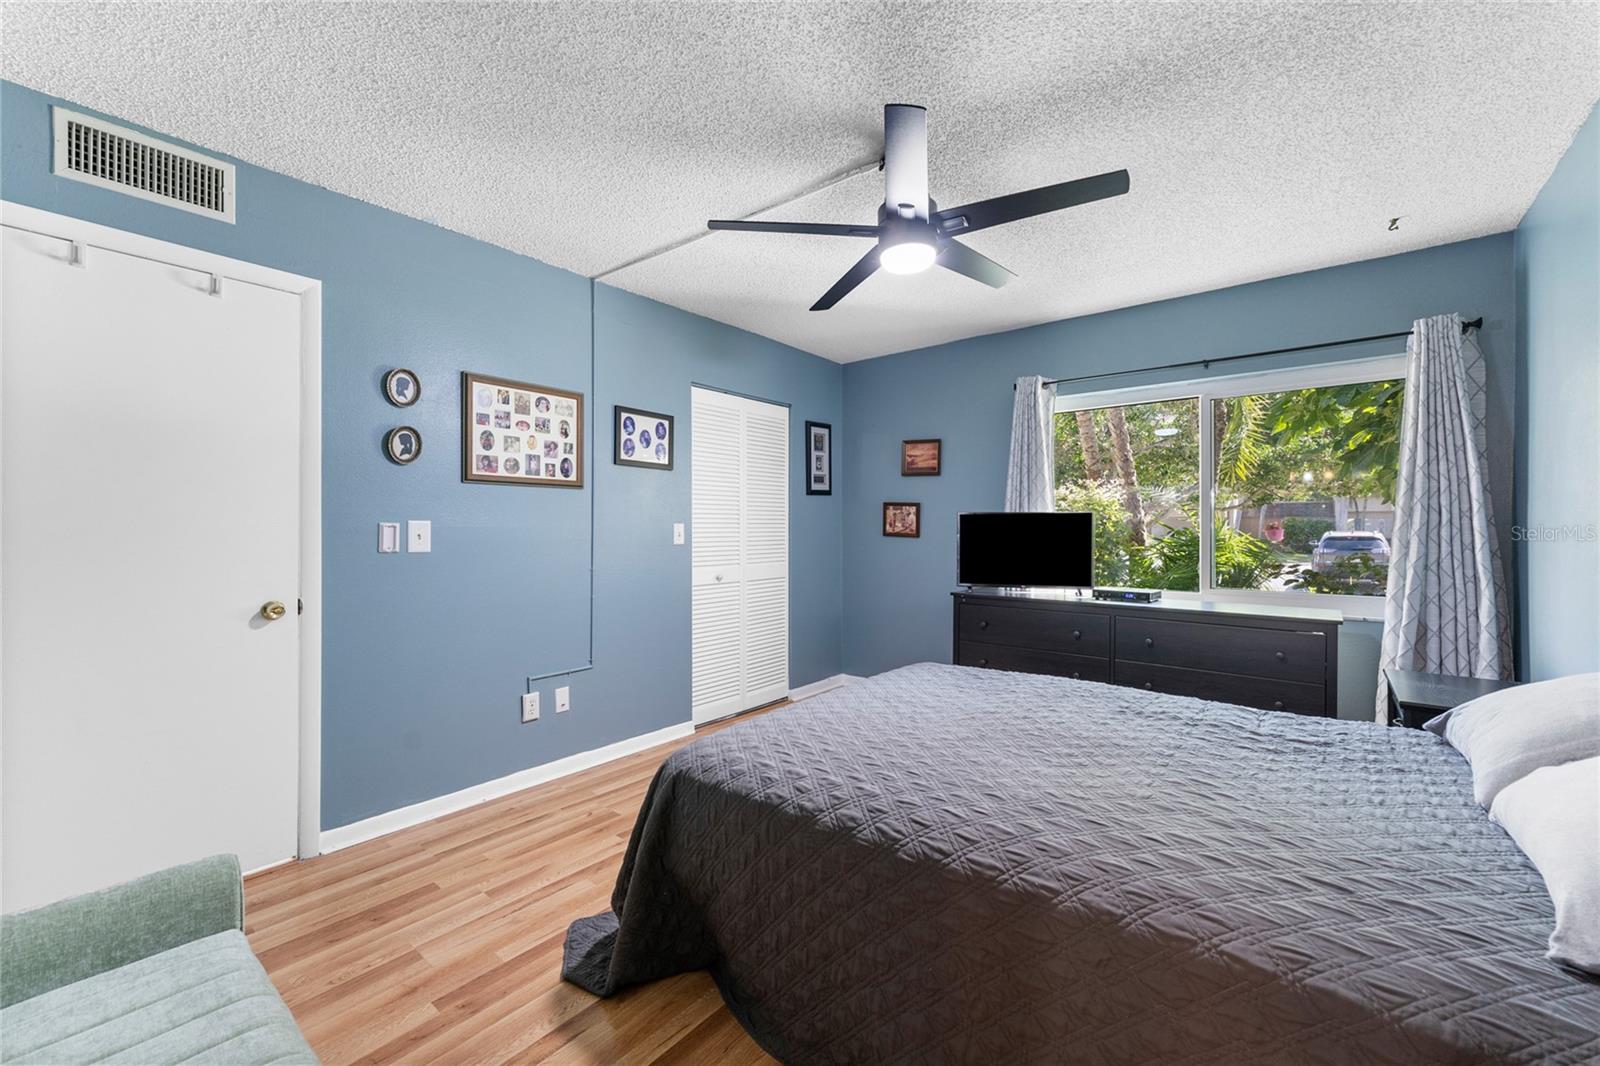 Ceiling Fans In Every Room!